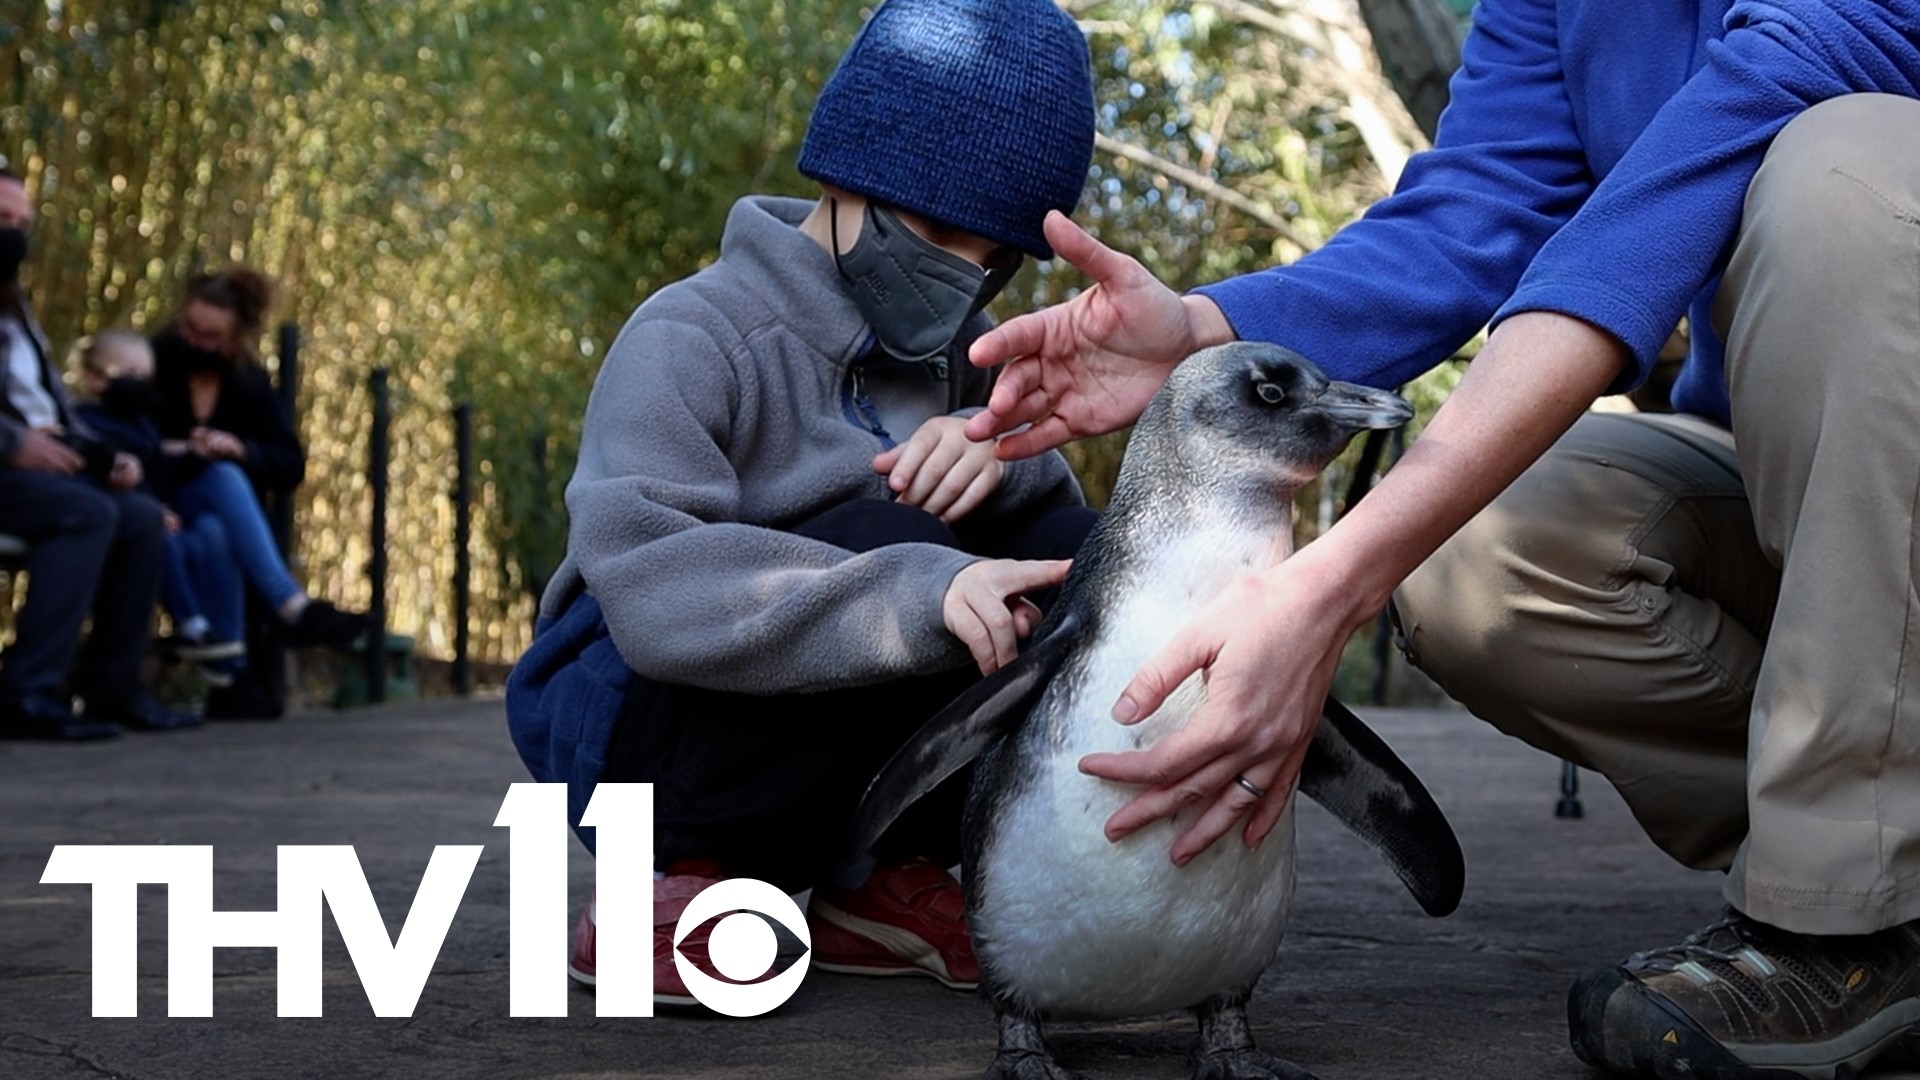 Say hello to Betty White! She is one of the newest penguins at the Little Rock Zoo and she is just as sweet as her namesake and may become an ambassador penguin!